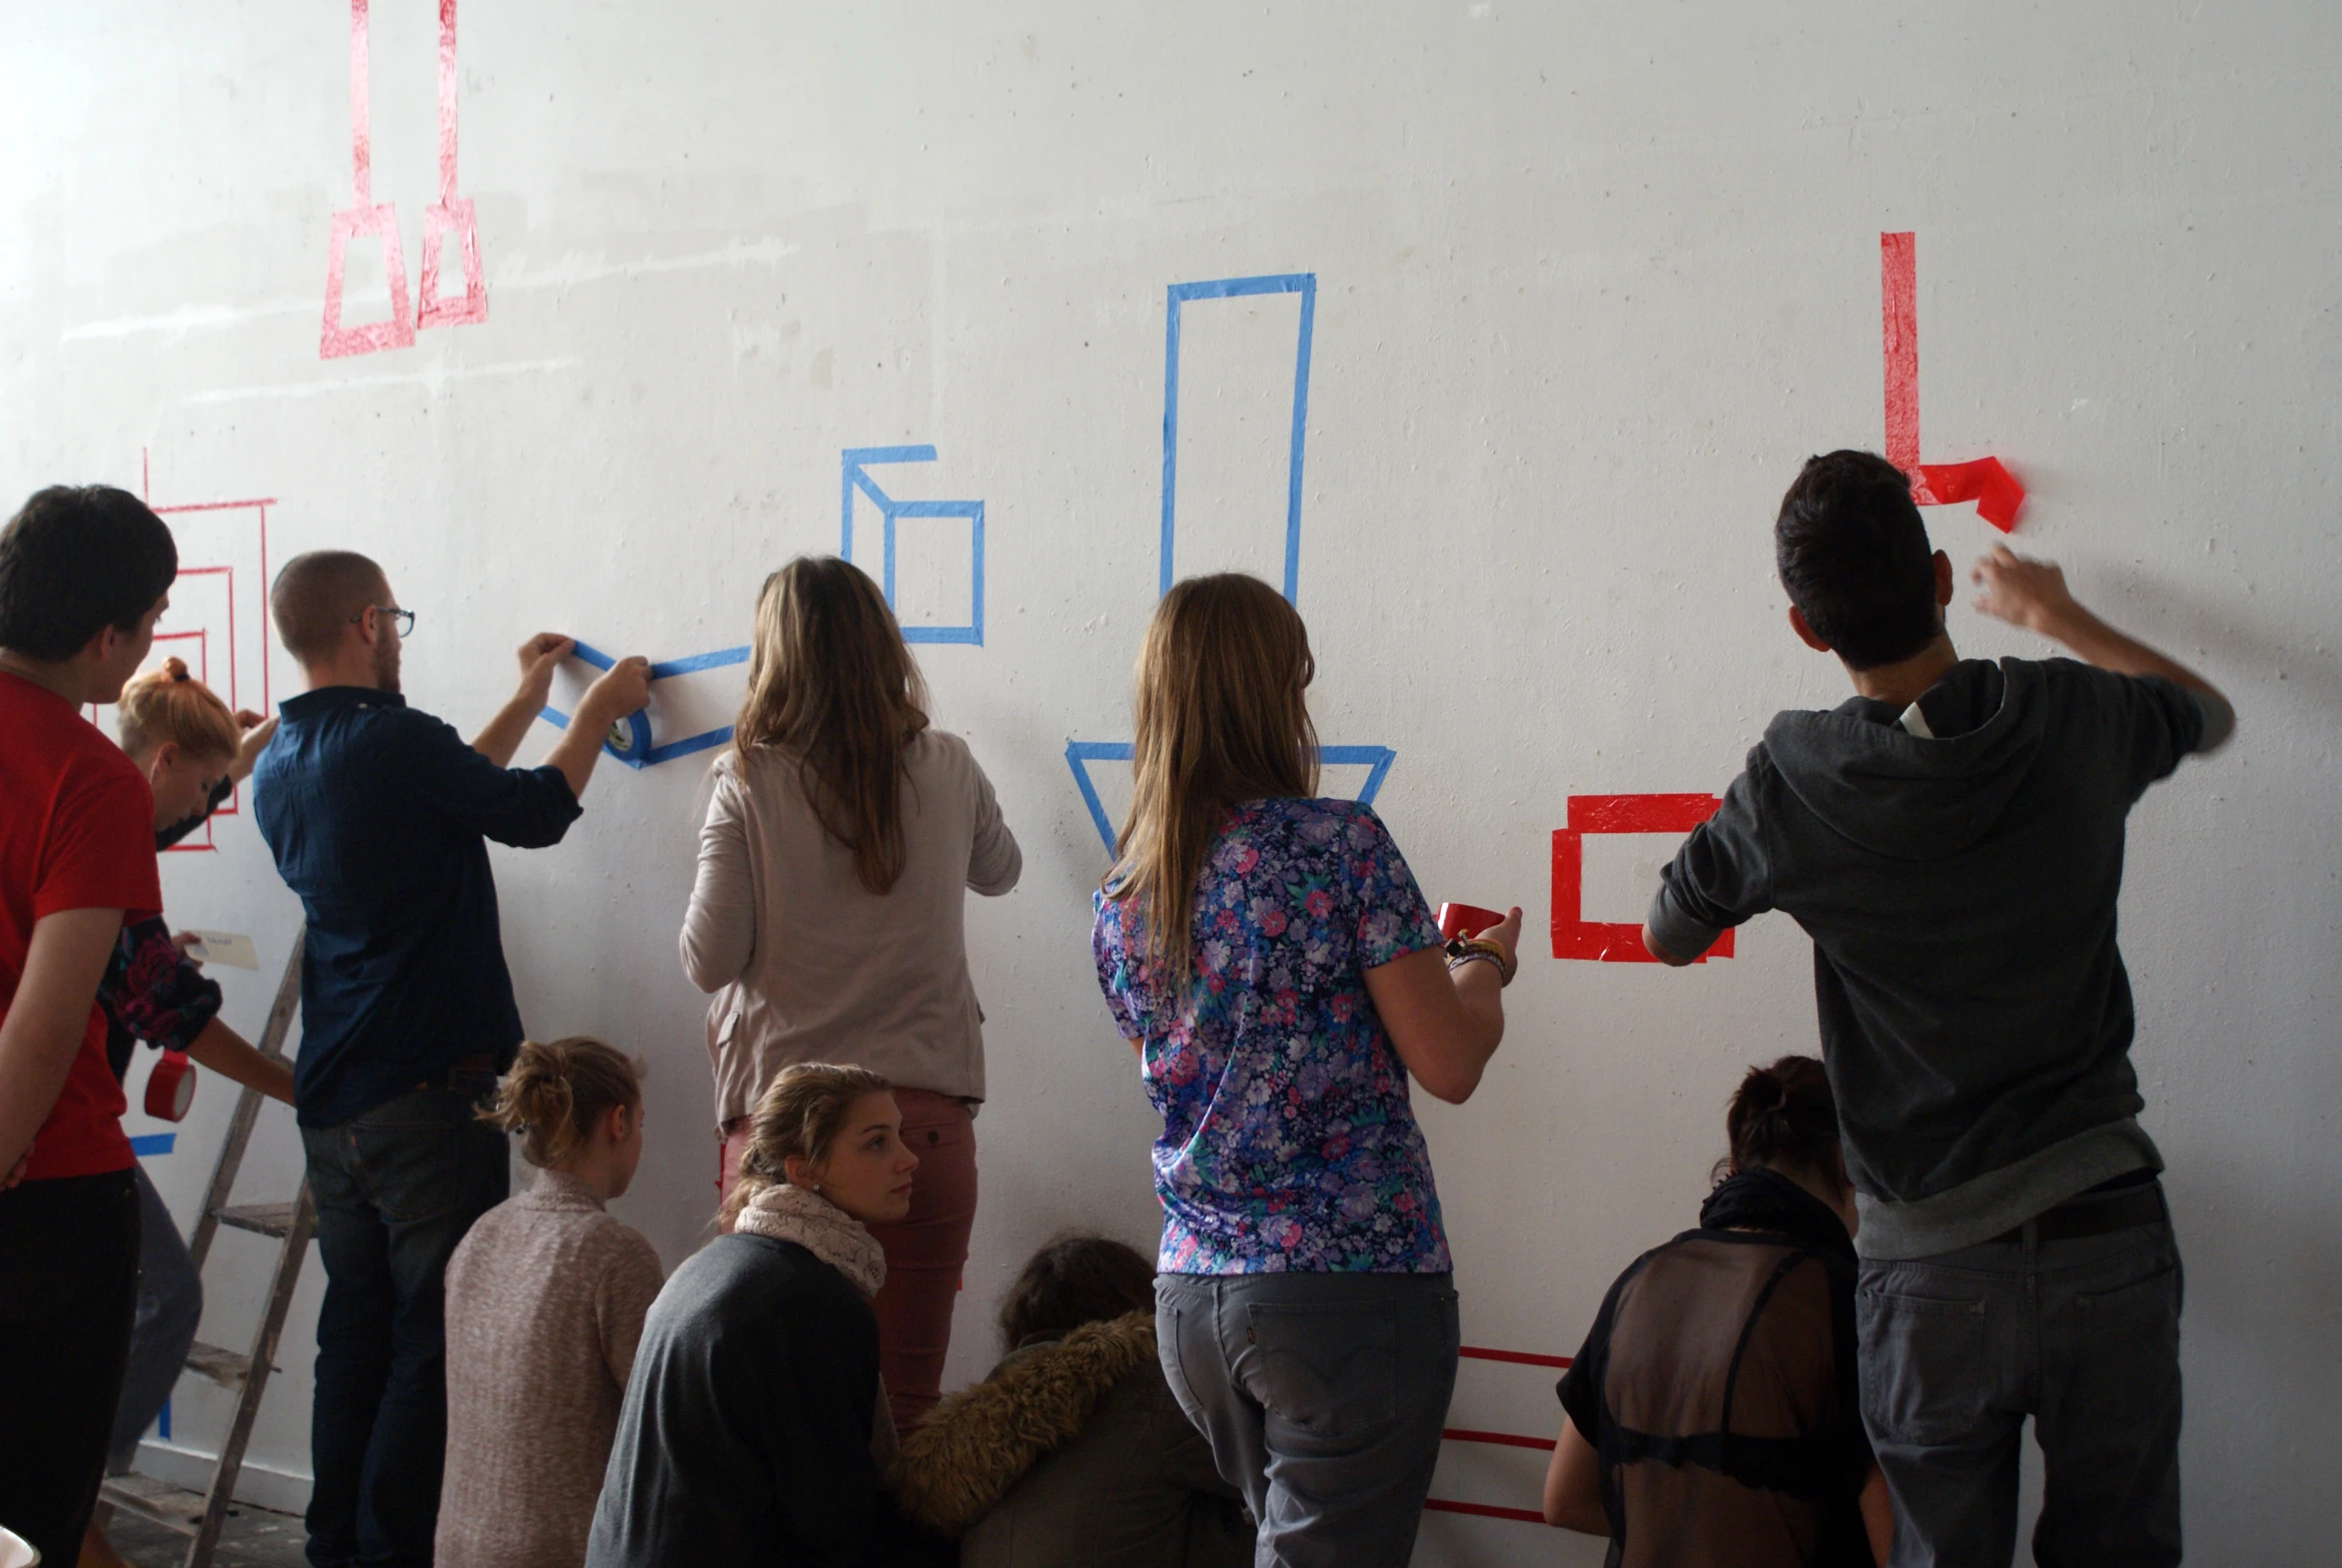 a group of people painting the wall with large red tape